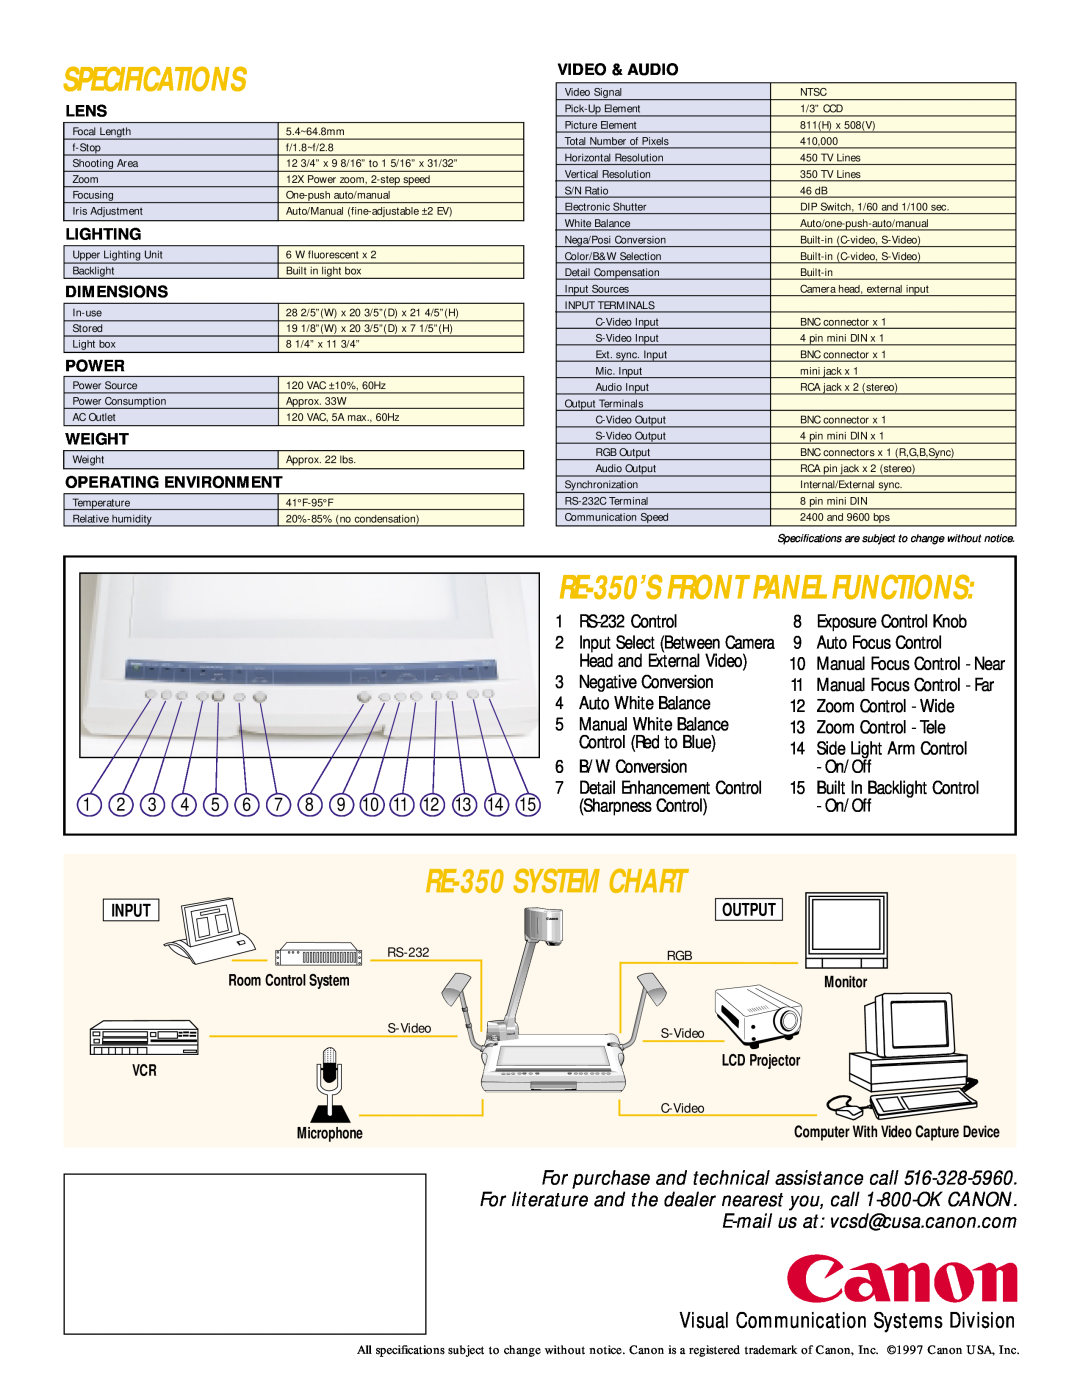 Canon Specifications, RE-350 SYSTEM CHART, RE-350’S FRONT PANEL FUNCTIONS, E-mail us at vcsd@cusa.canon.com, Input 